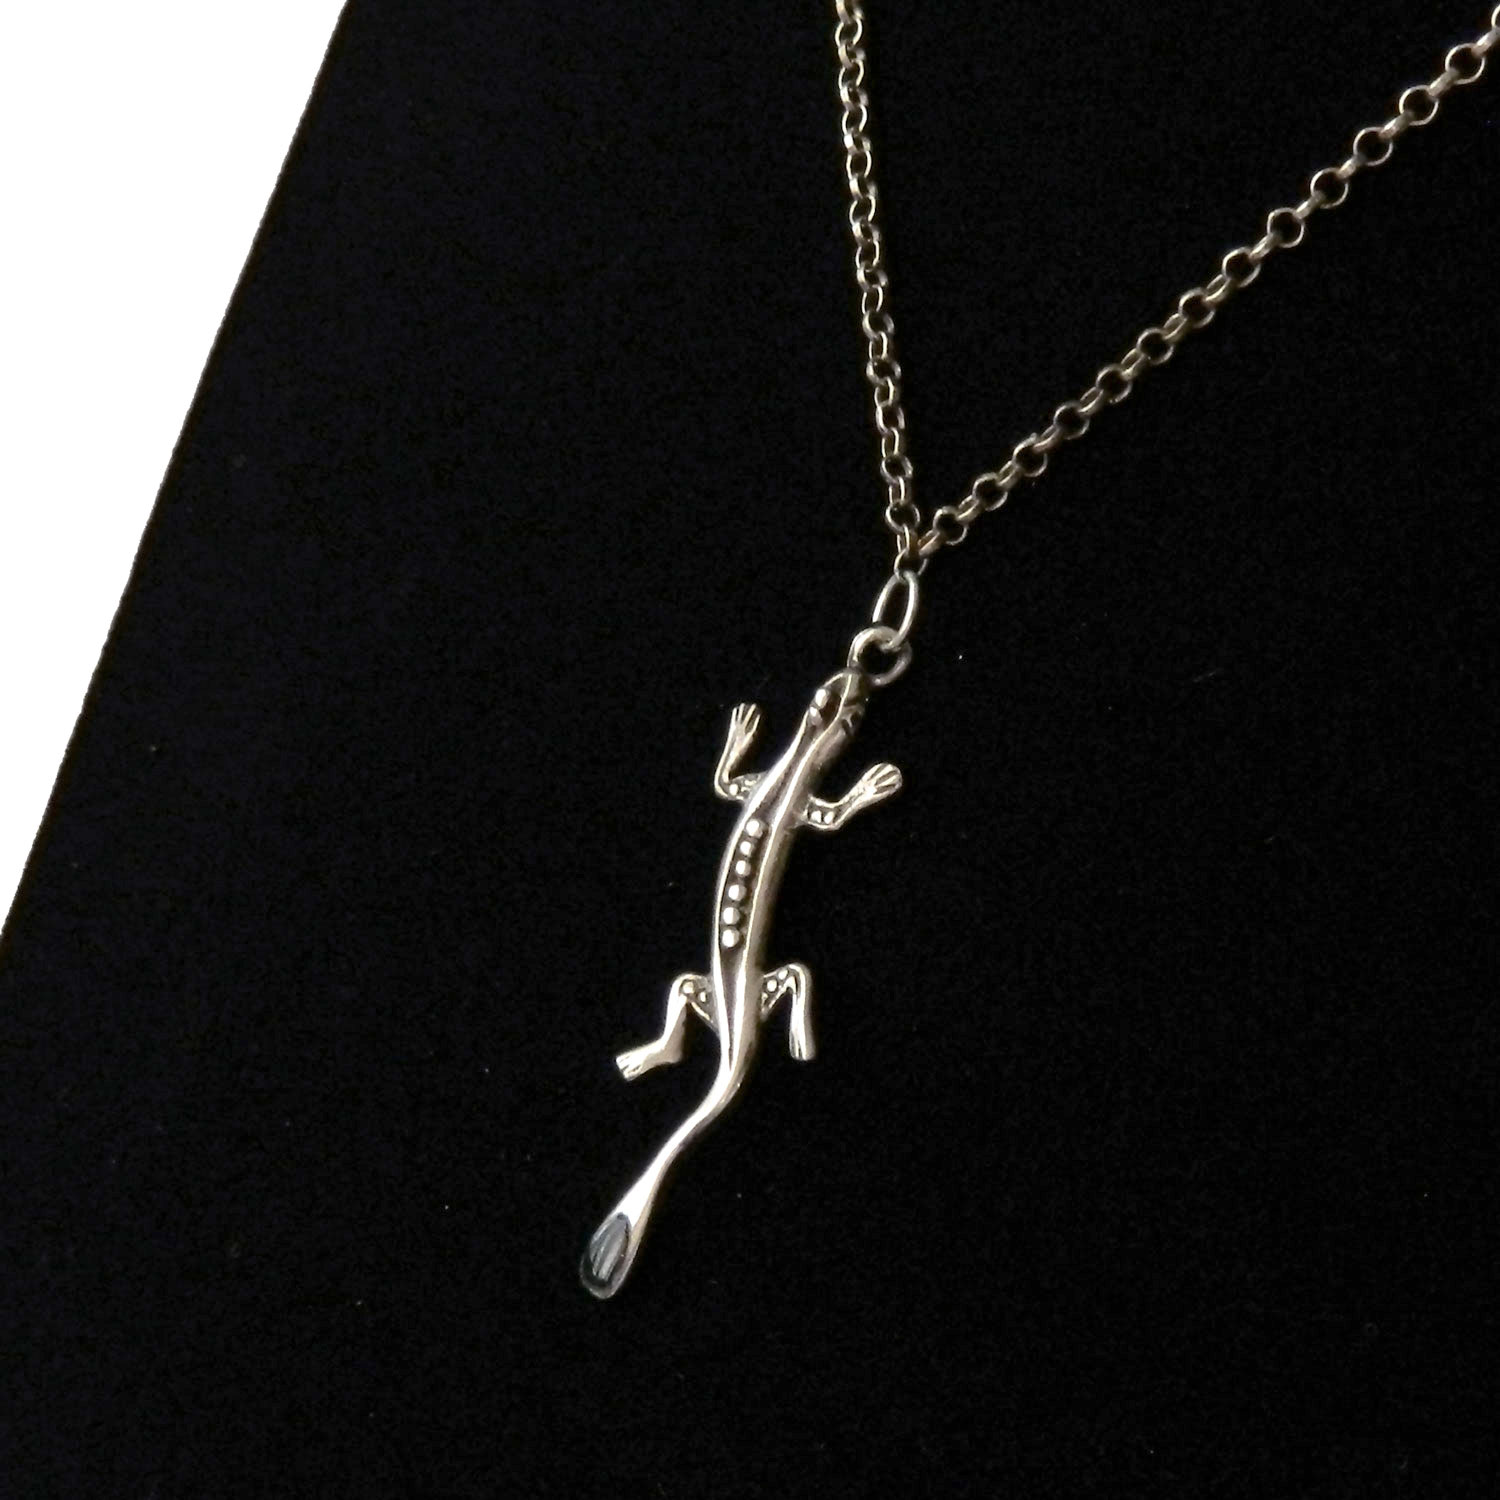 Sterling silver gecko pendant necklace